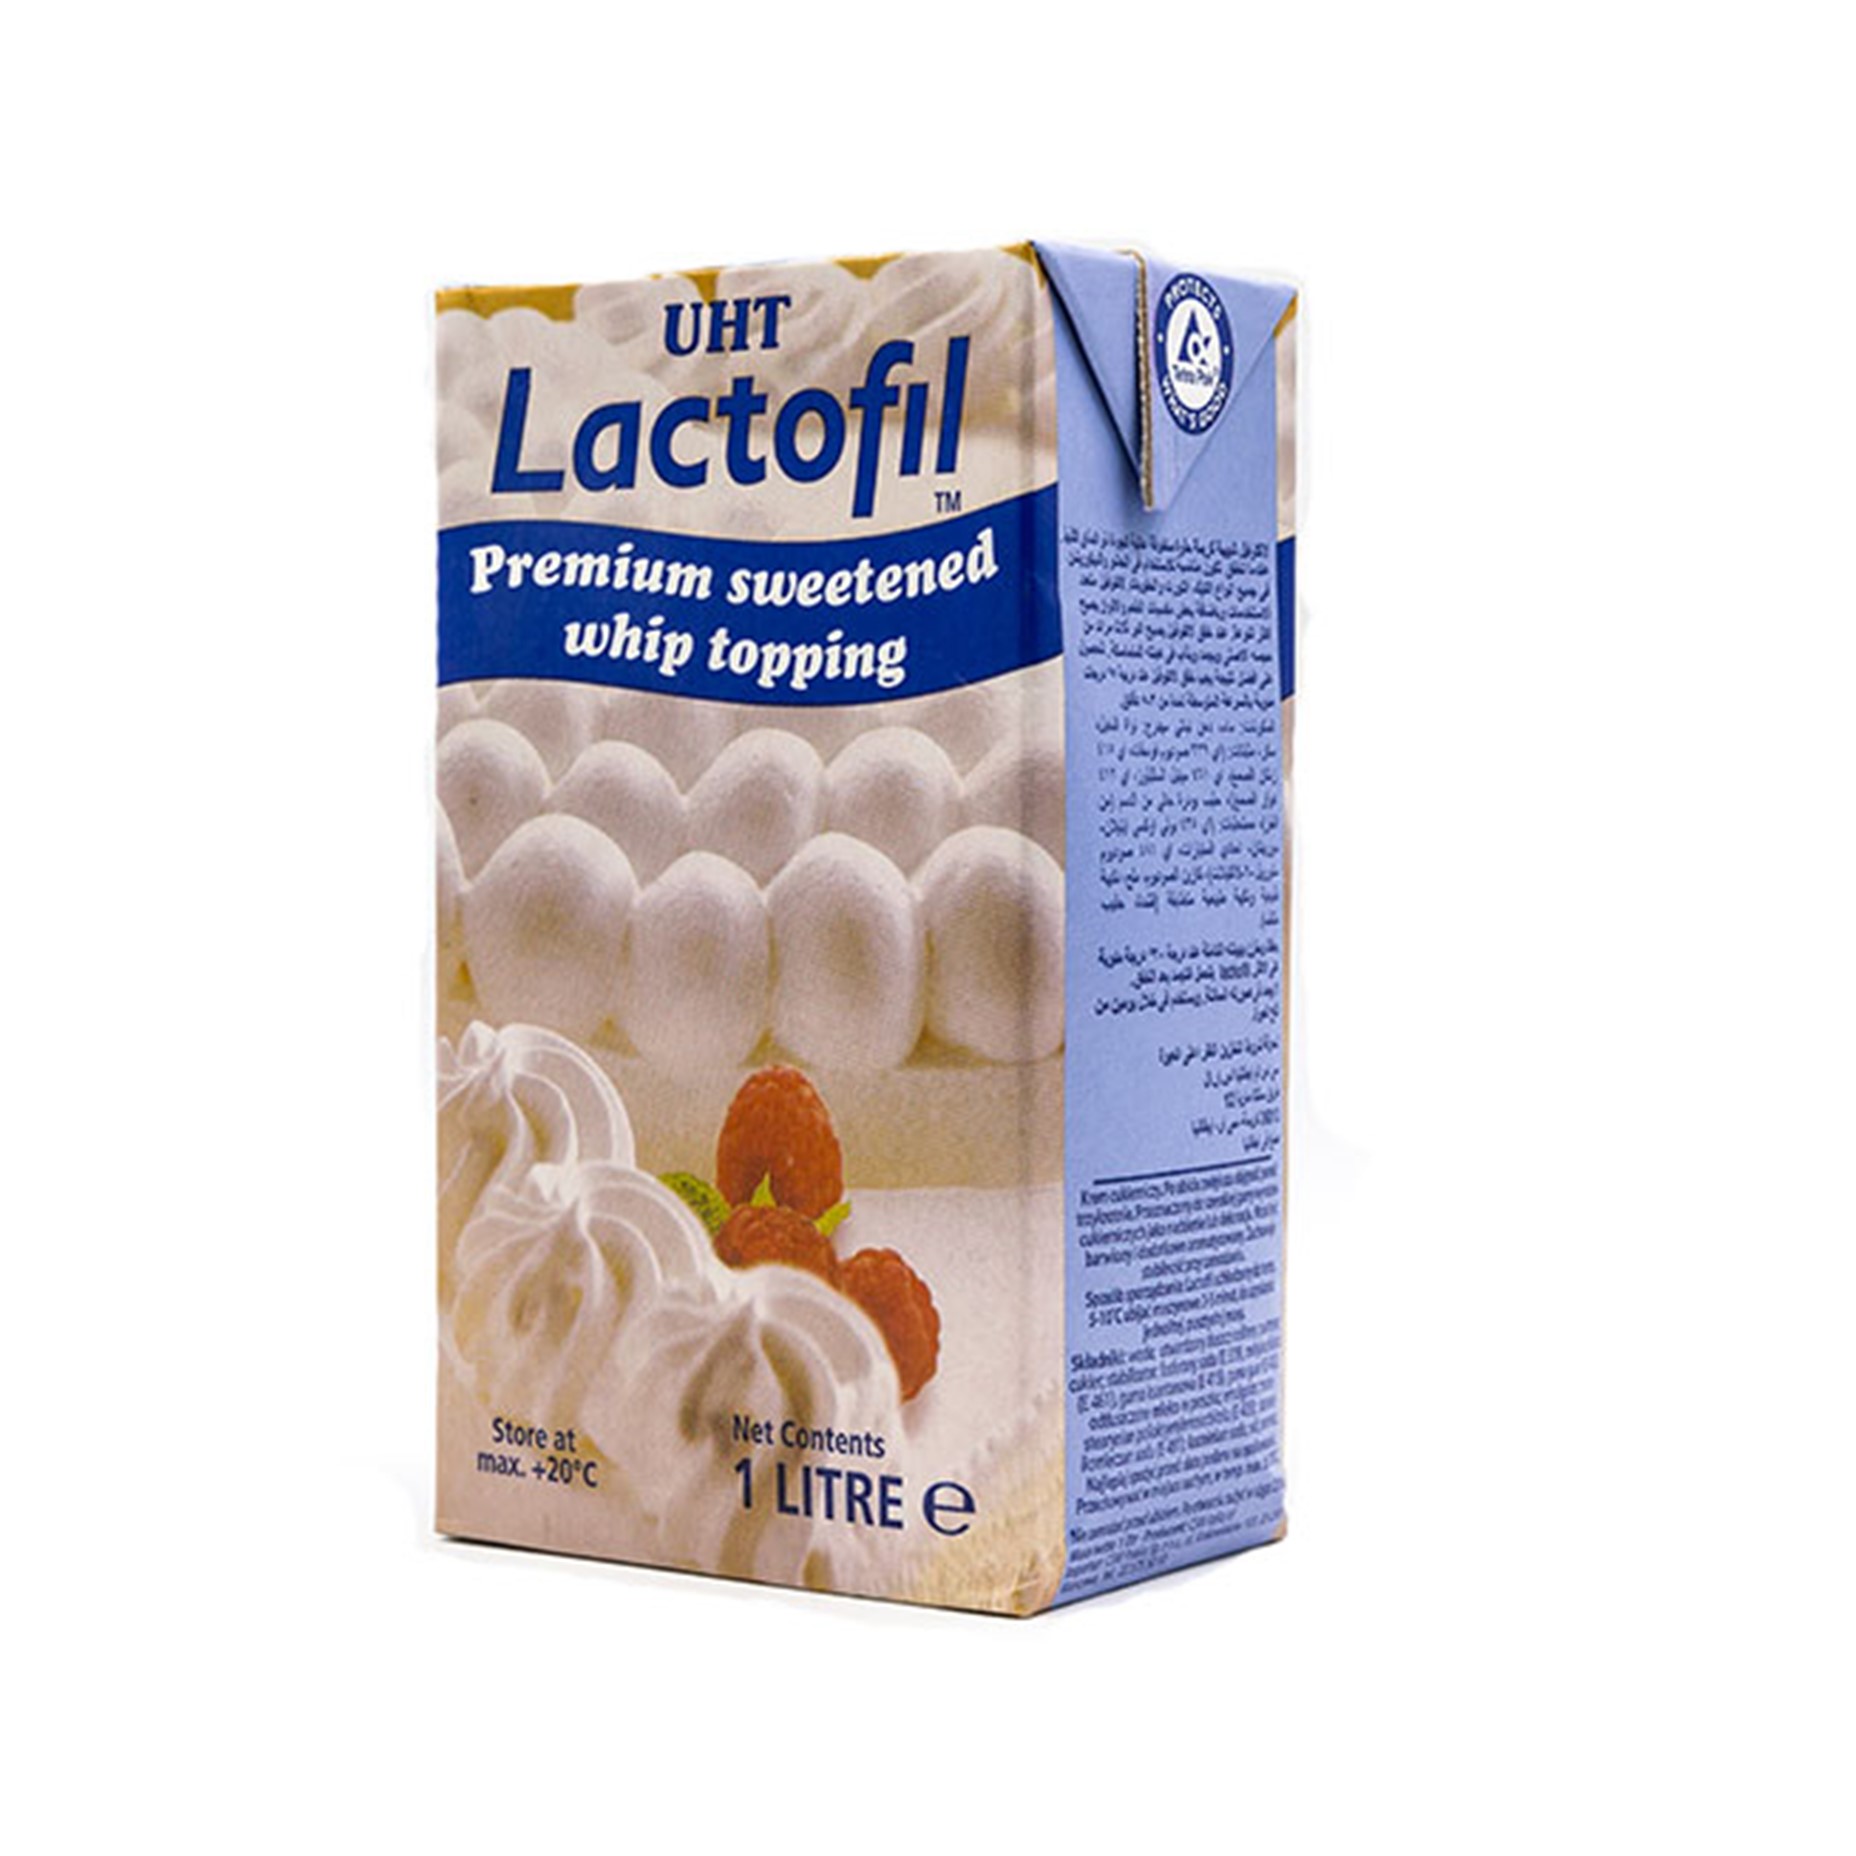 MACTOP TRADITIONAL MACPHIE 10L Pack 1L Pack Cakes Cupcakes Piping Whipping Cream